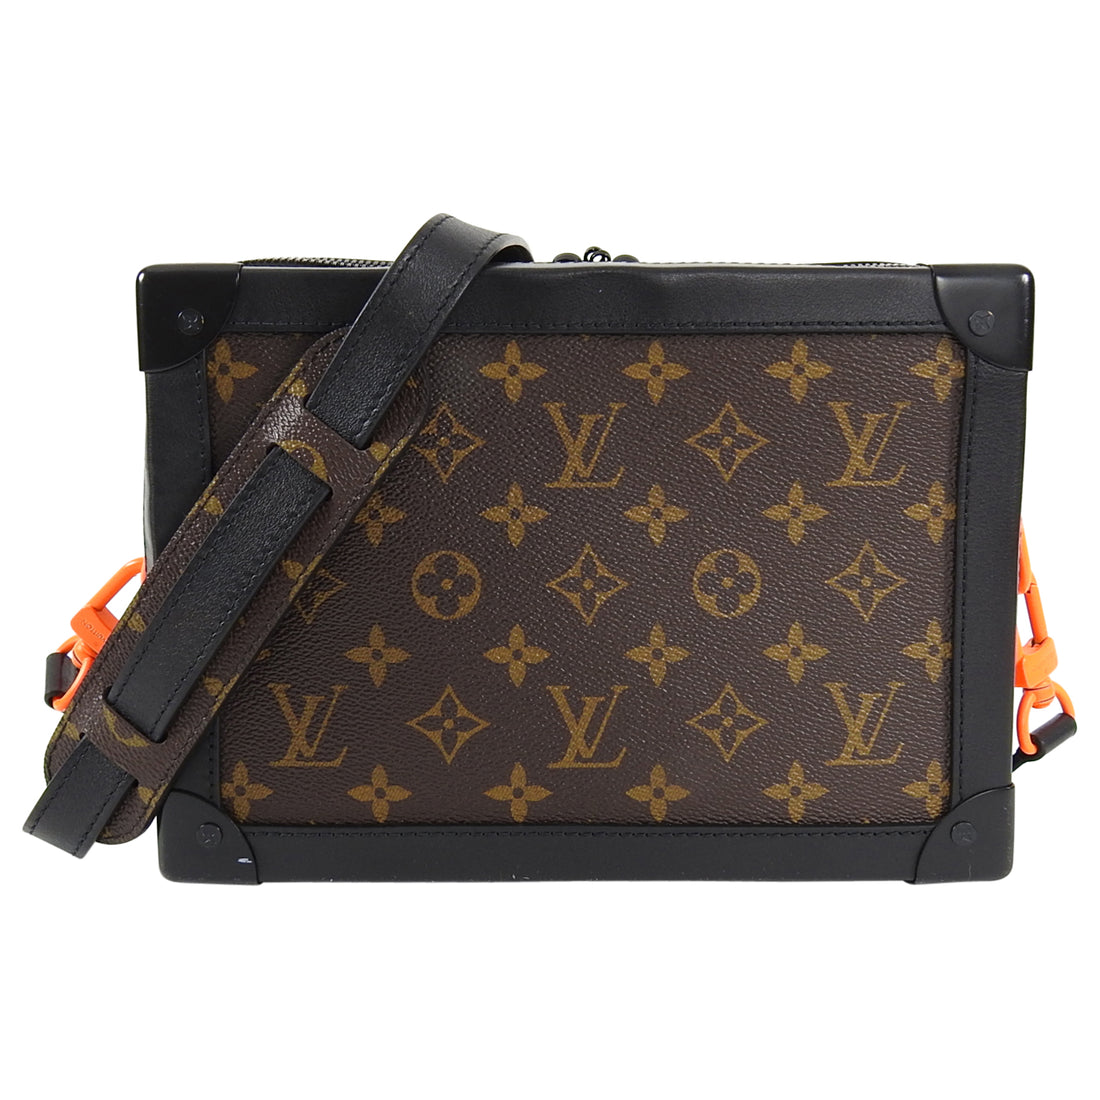 Louis Vuitton SS2019 Virgil Abloh soft trunk crossbody - sold out  everywhere #louisvuittonsofttrunk . . Available in store or purchase…